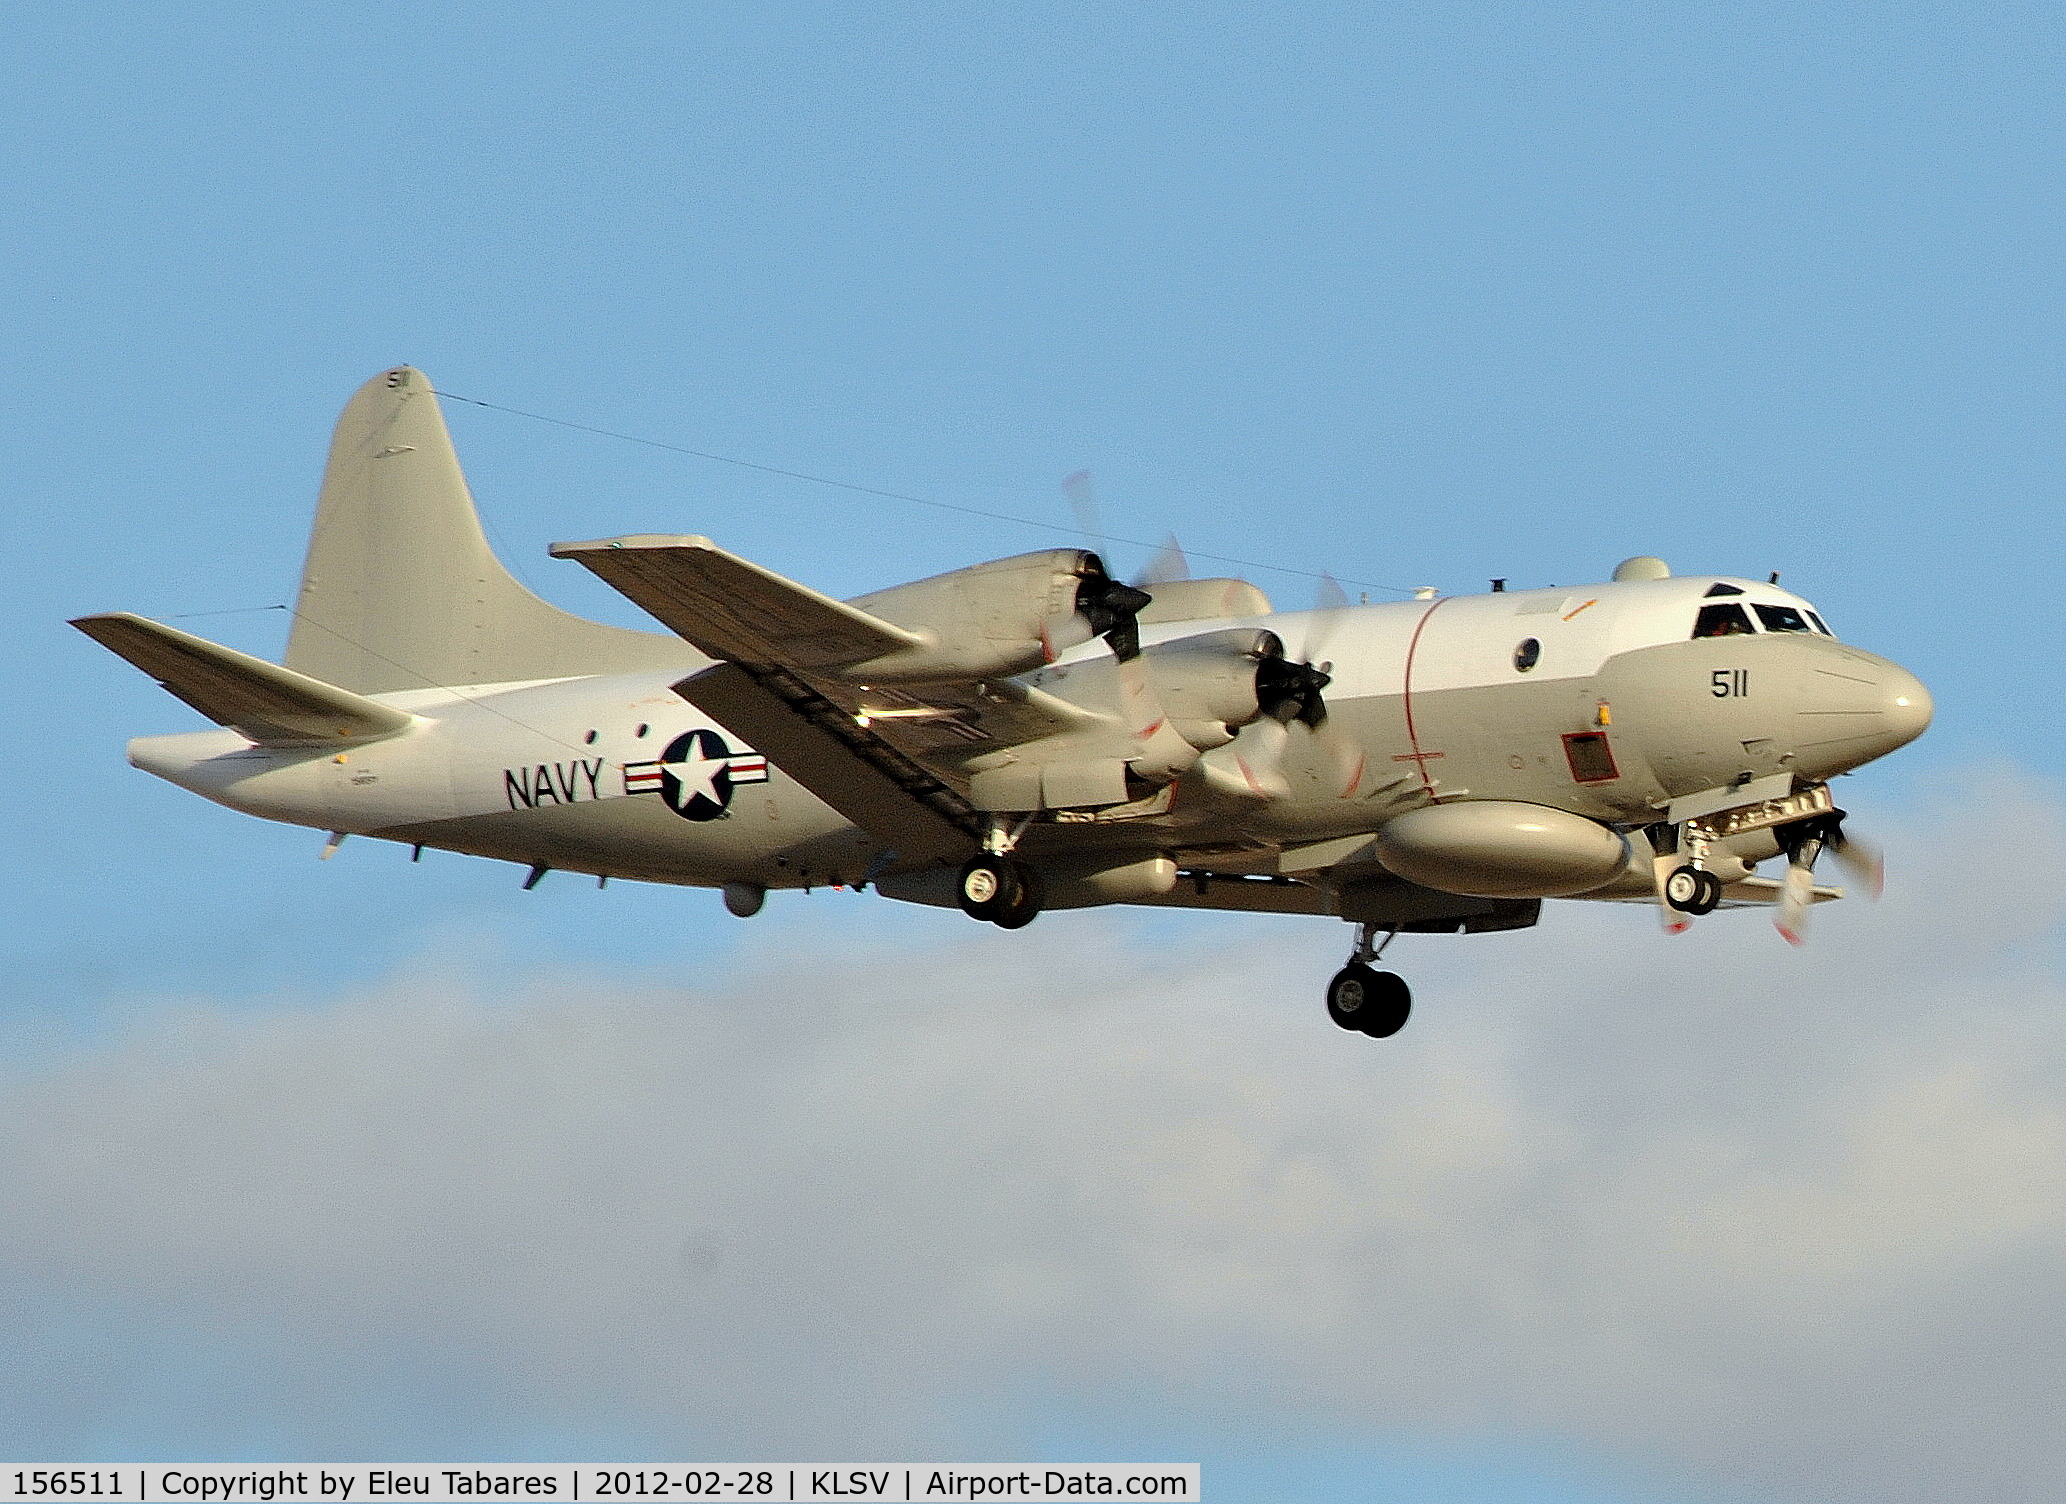 156511, Lockheed EP-3E Aries II C/N 285A-5505, Taken during Red Flag Exercise at Nellis Air Force Base, Nevada.